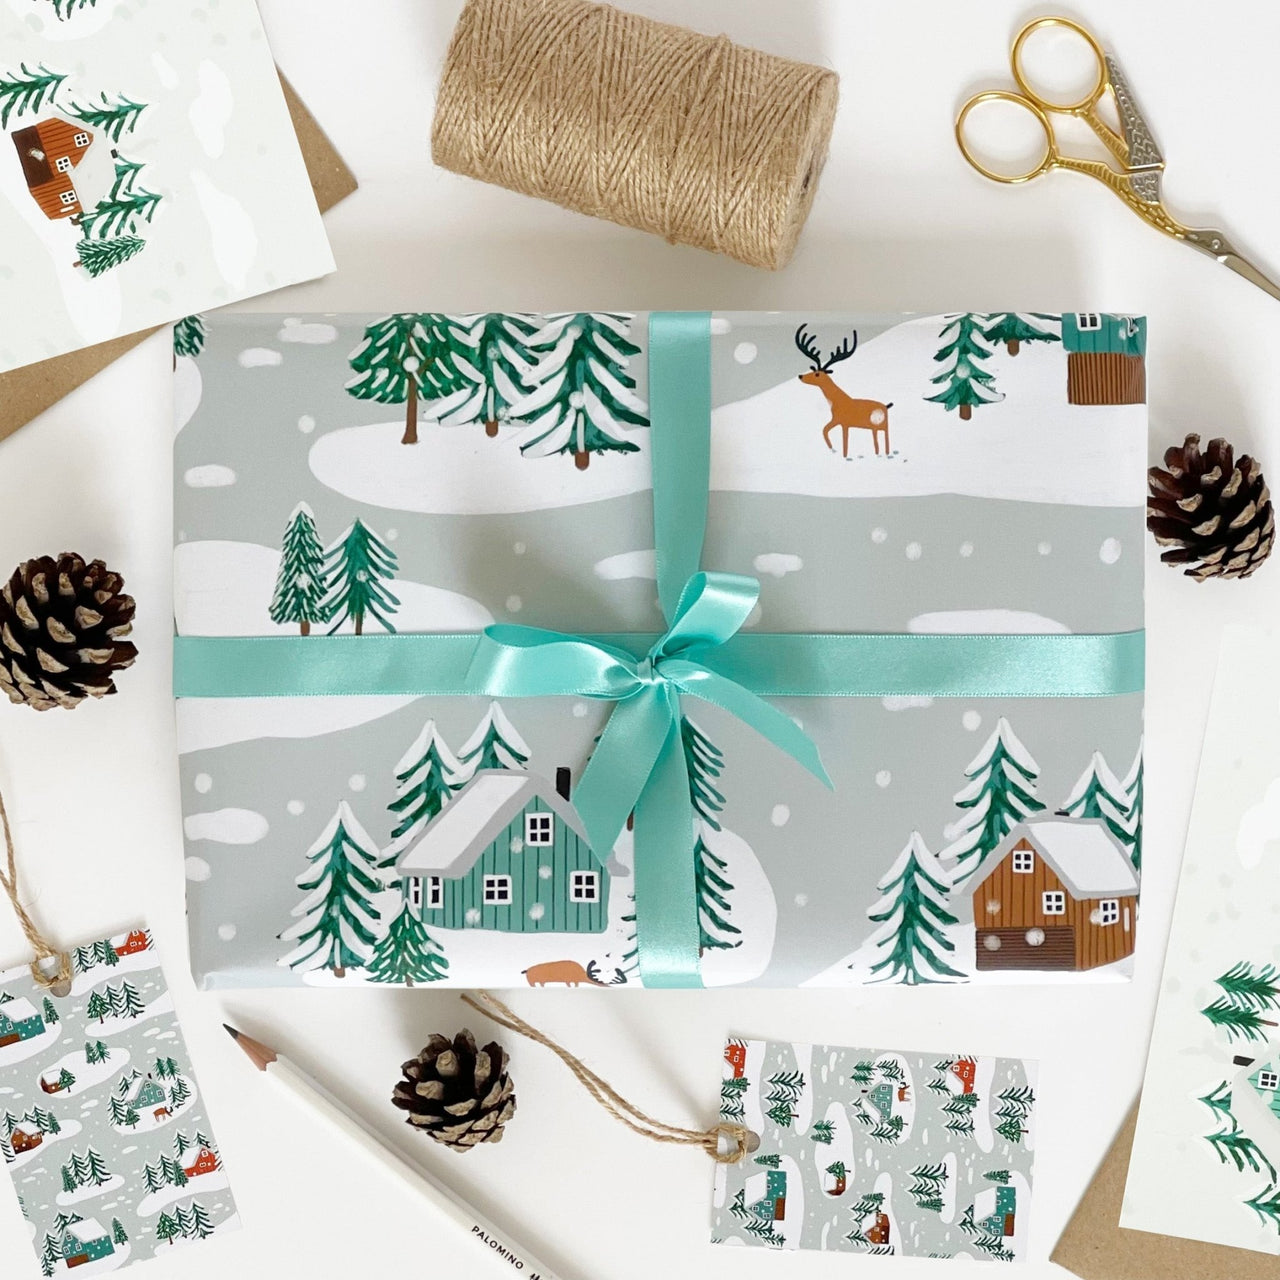 Little Log Cabins in the Snow Recyclable Wrapping Paper Set & Tags - Made Scotland